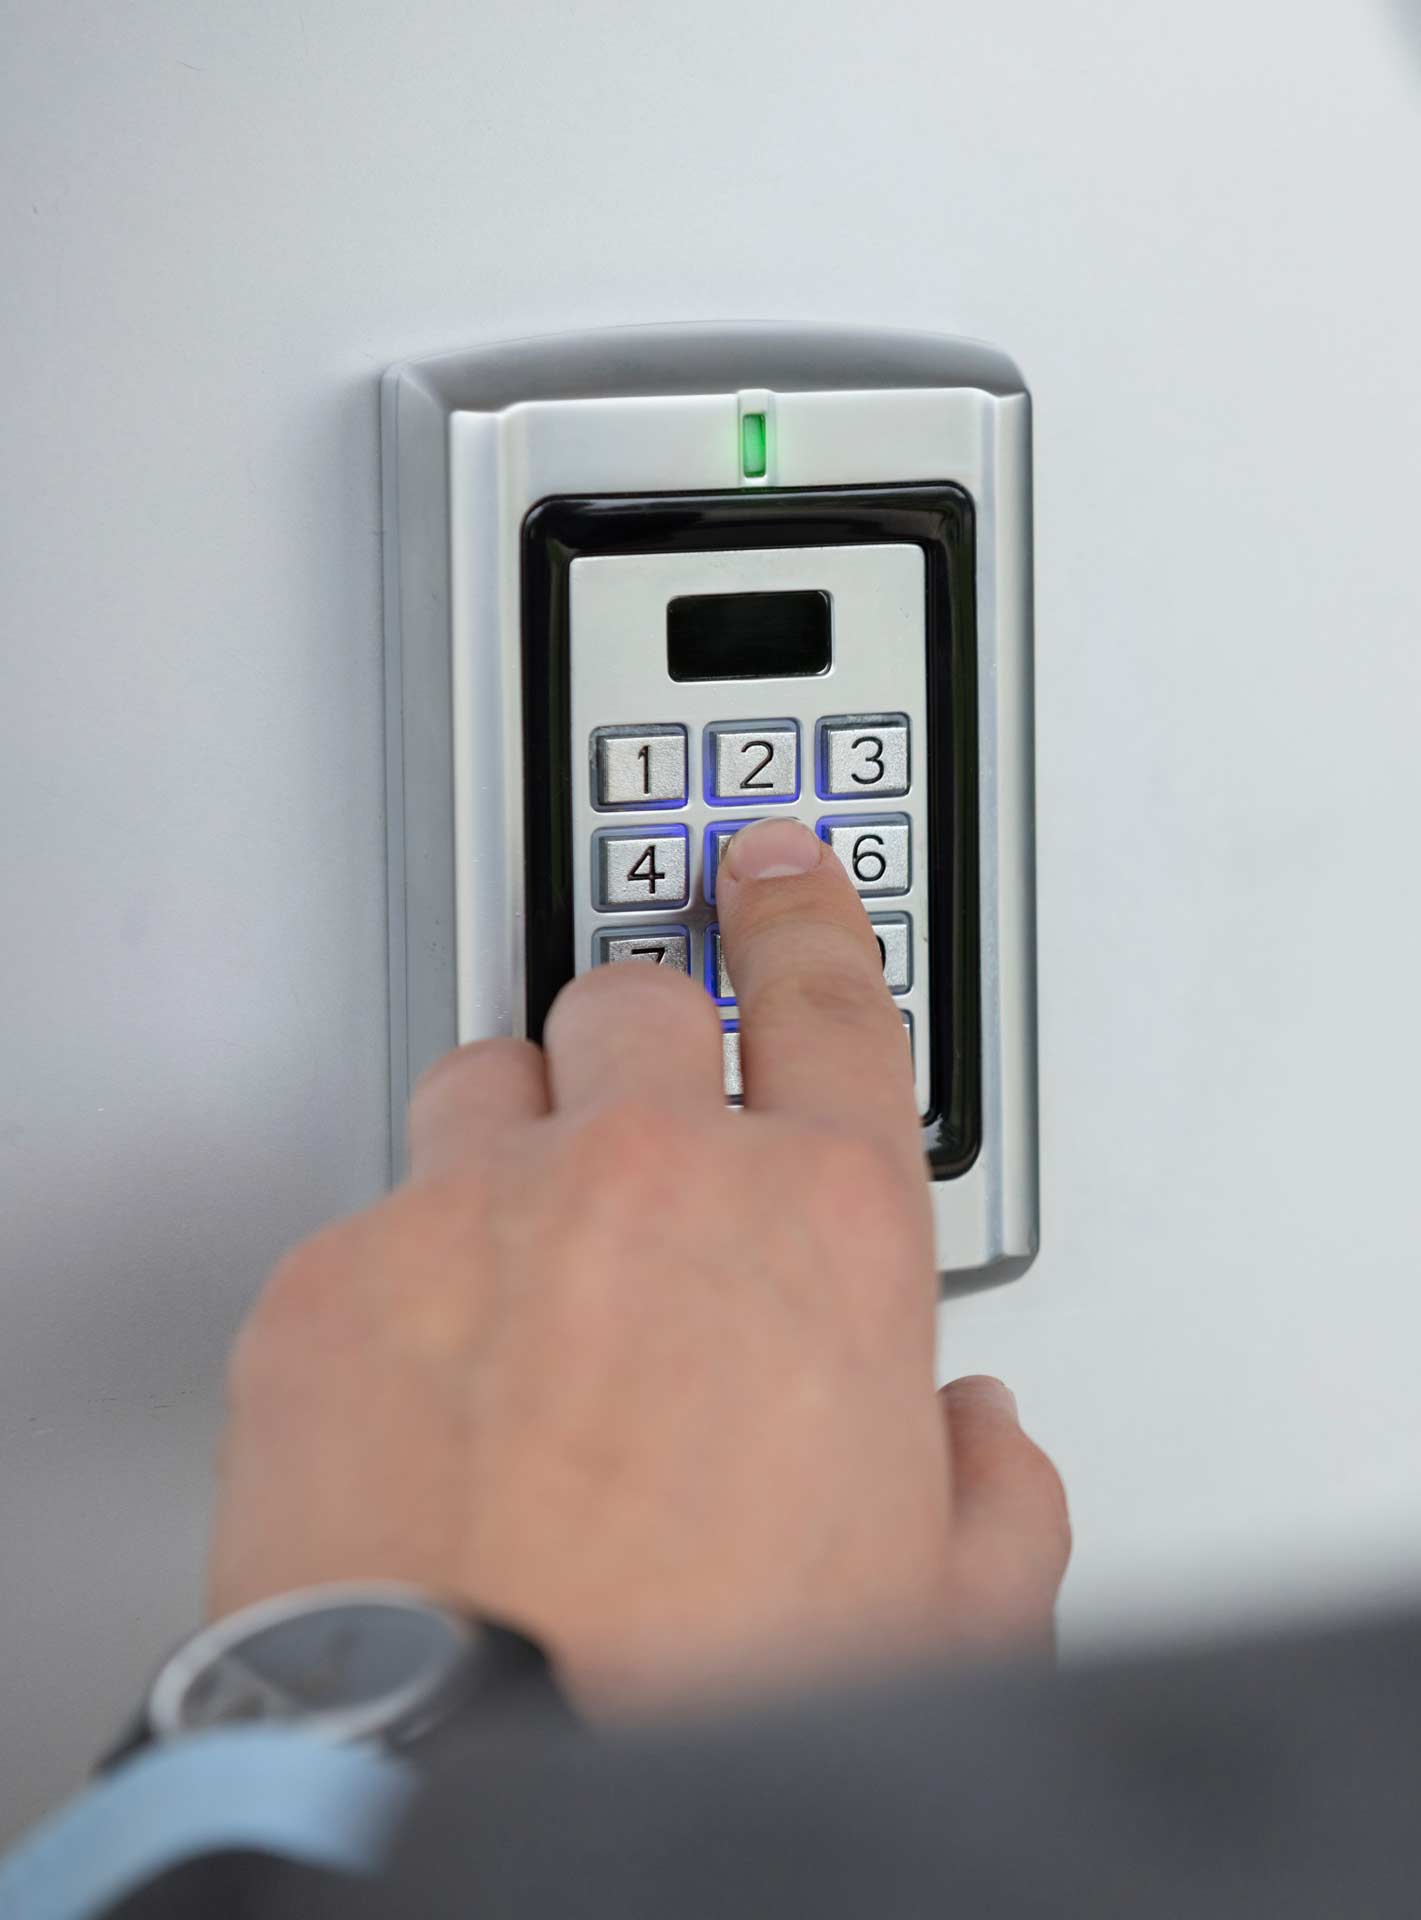 A man enters a pin on door security device